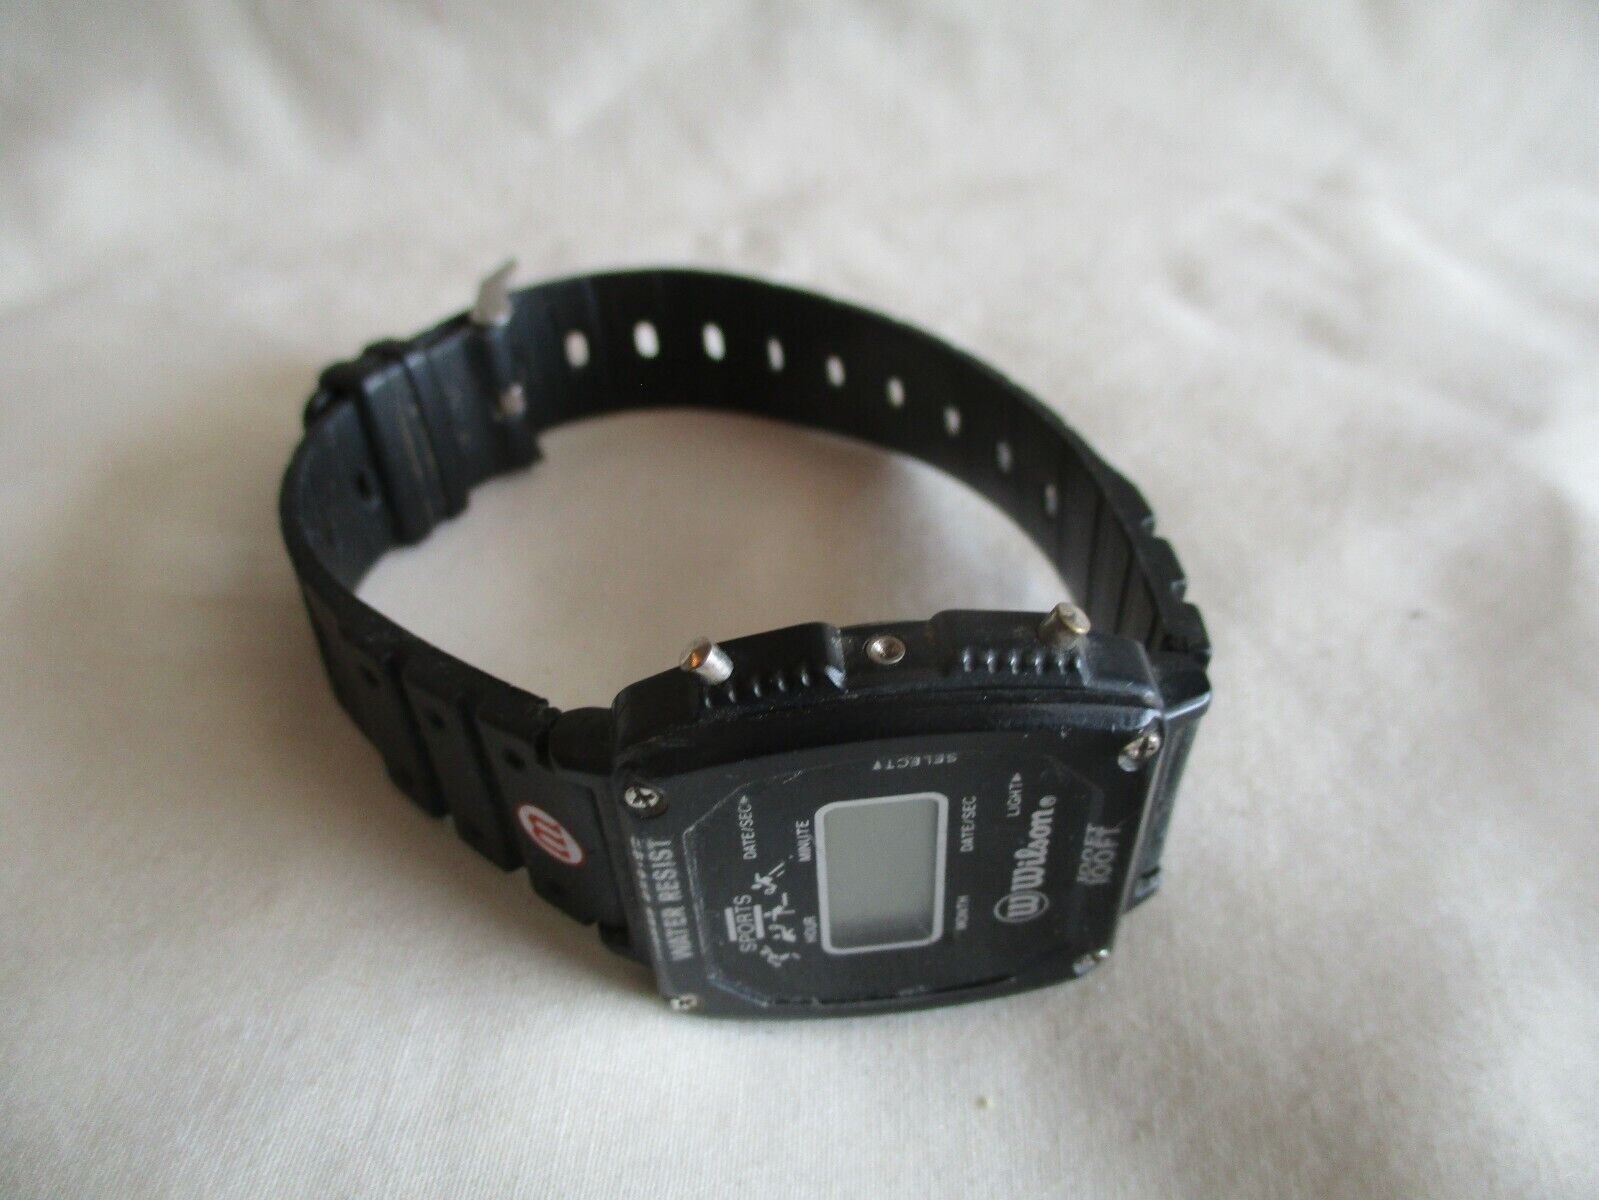 Wilson Digital Wristwatch with a Buckle Band and 100ft Water Resistance